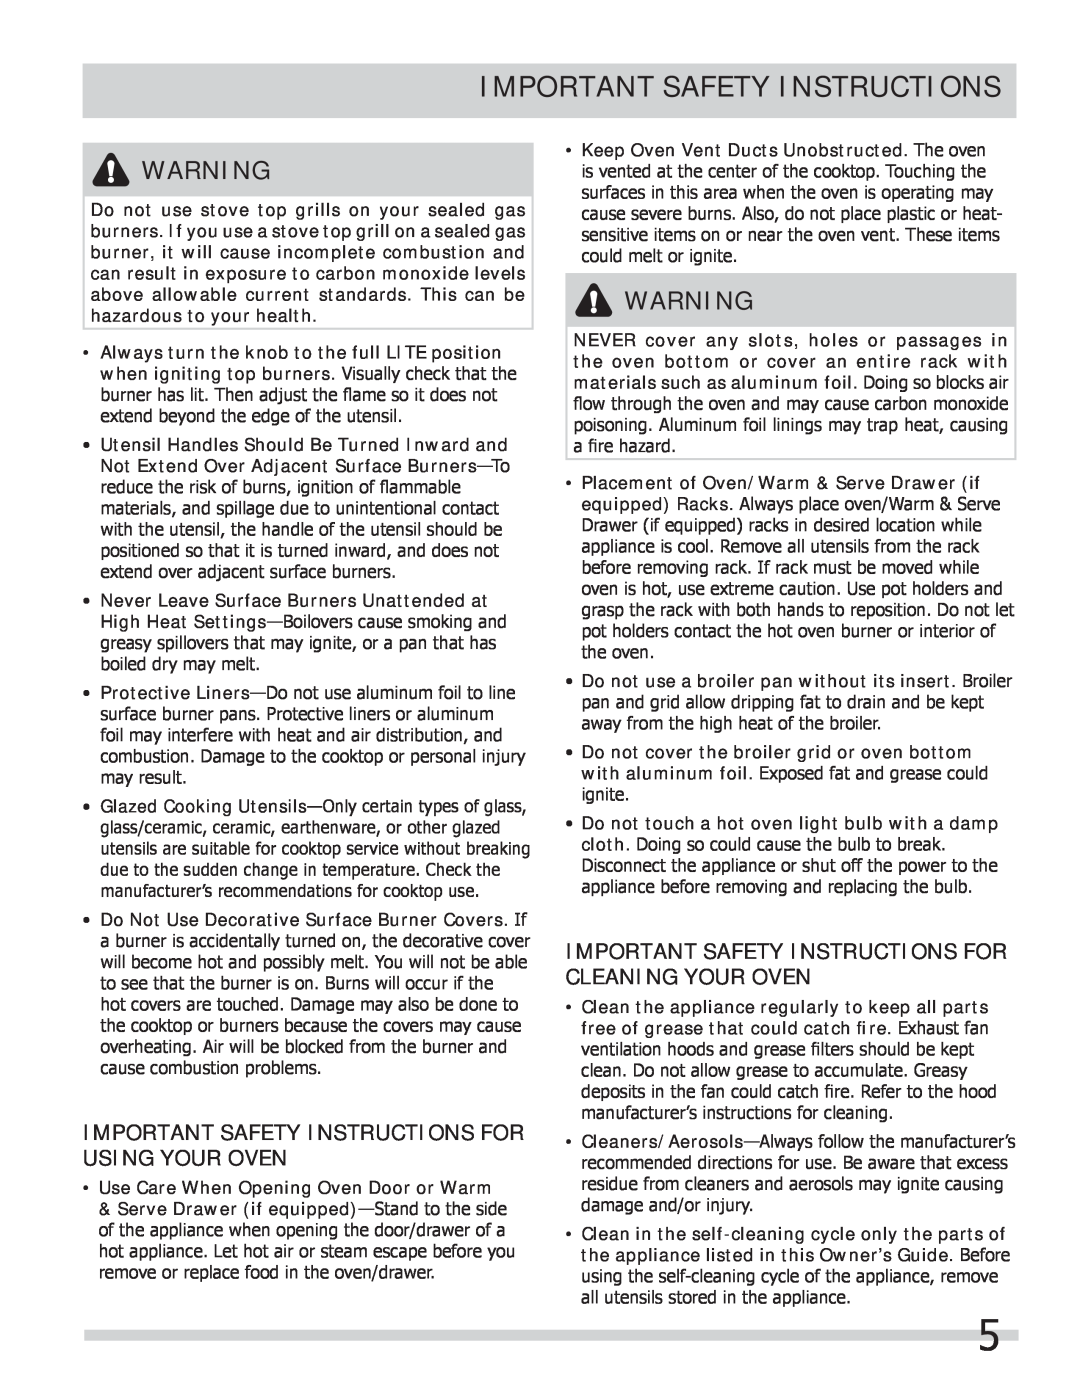 Frigidaire 318205258 important safety instructions Important Safety Instructions For Using Your Oven 